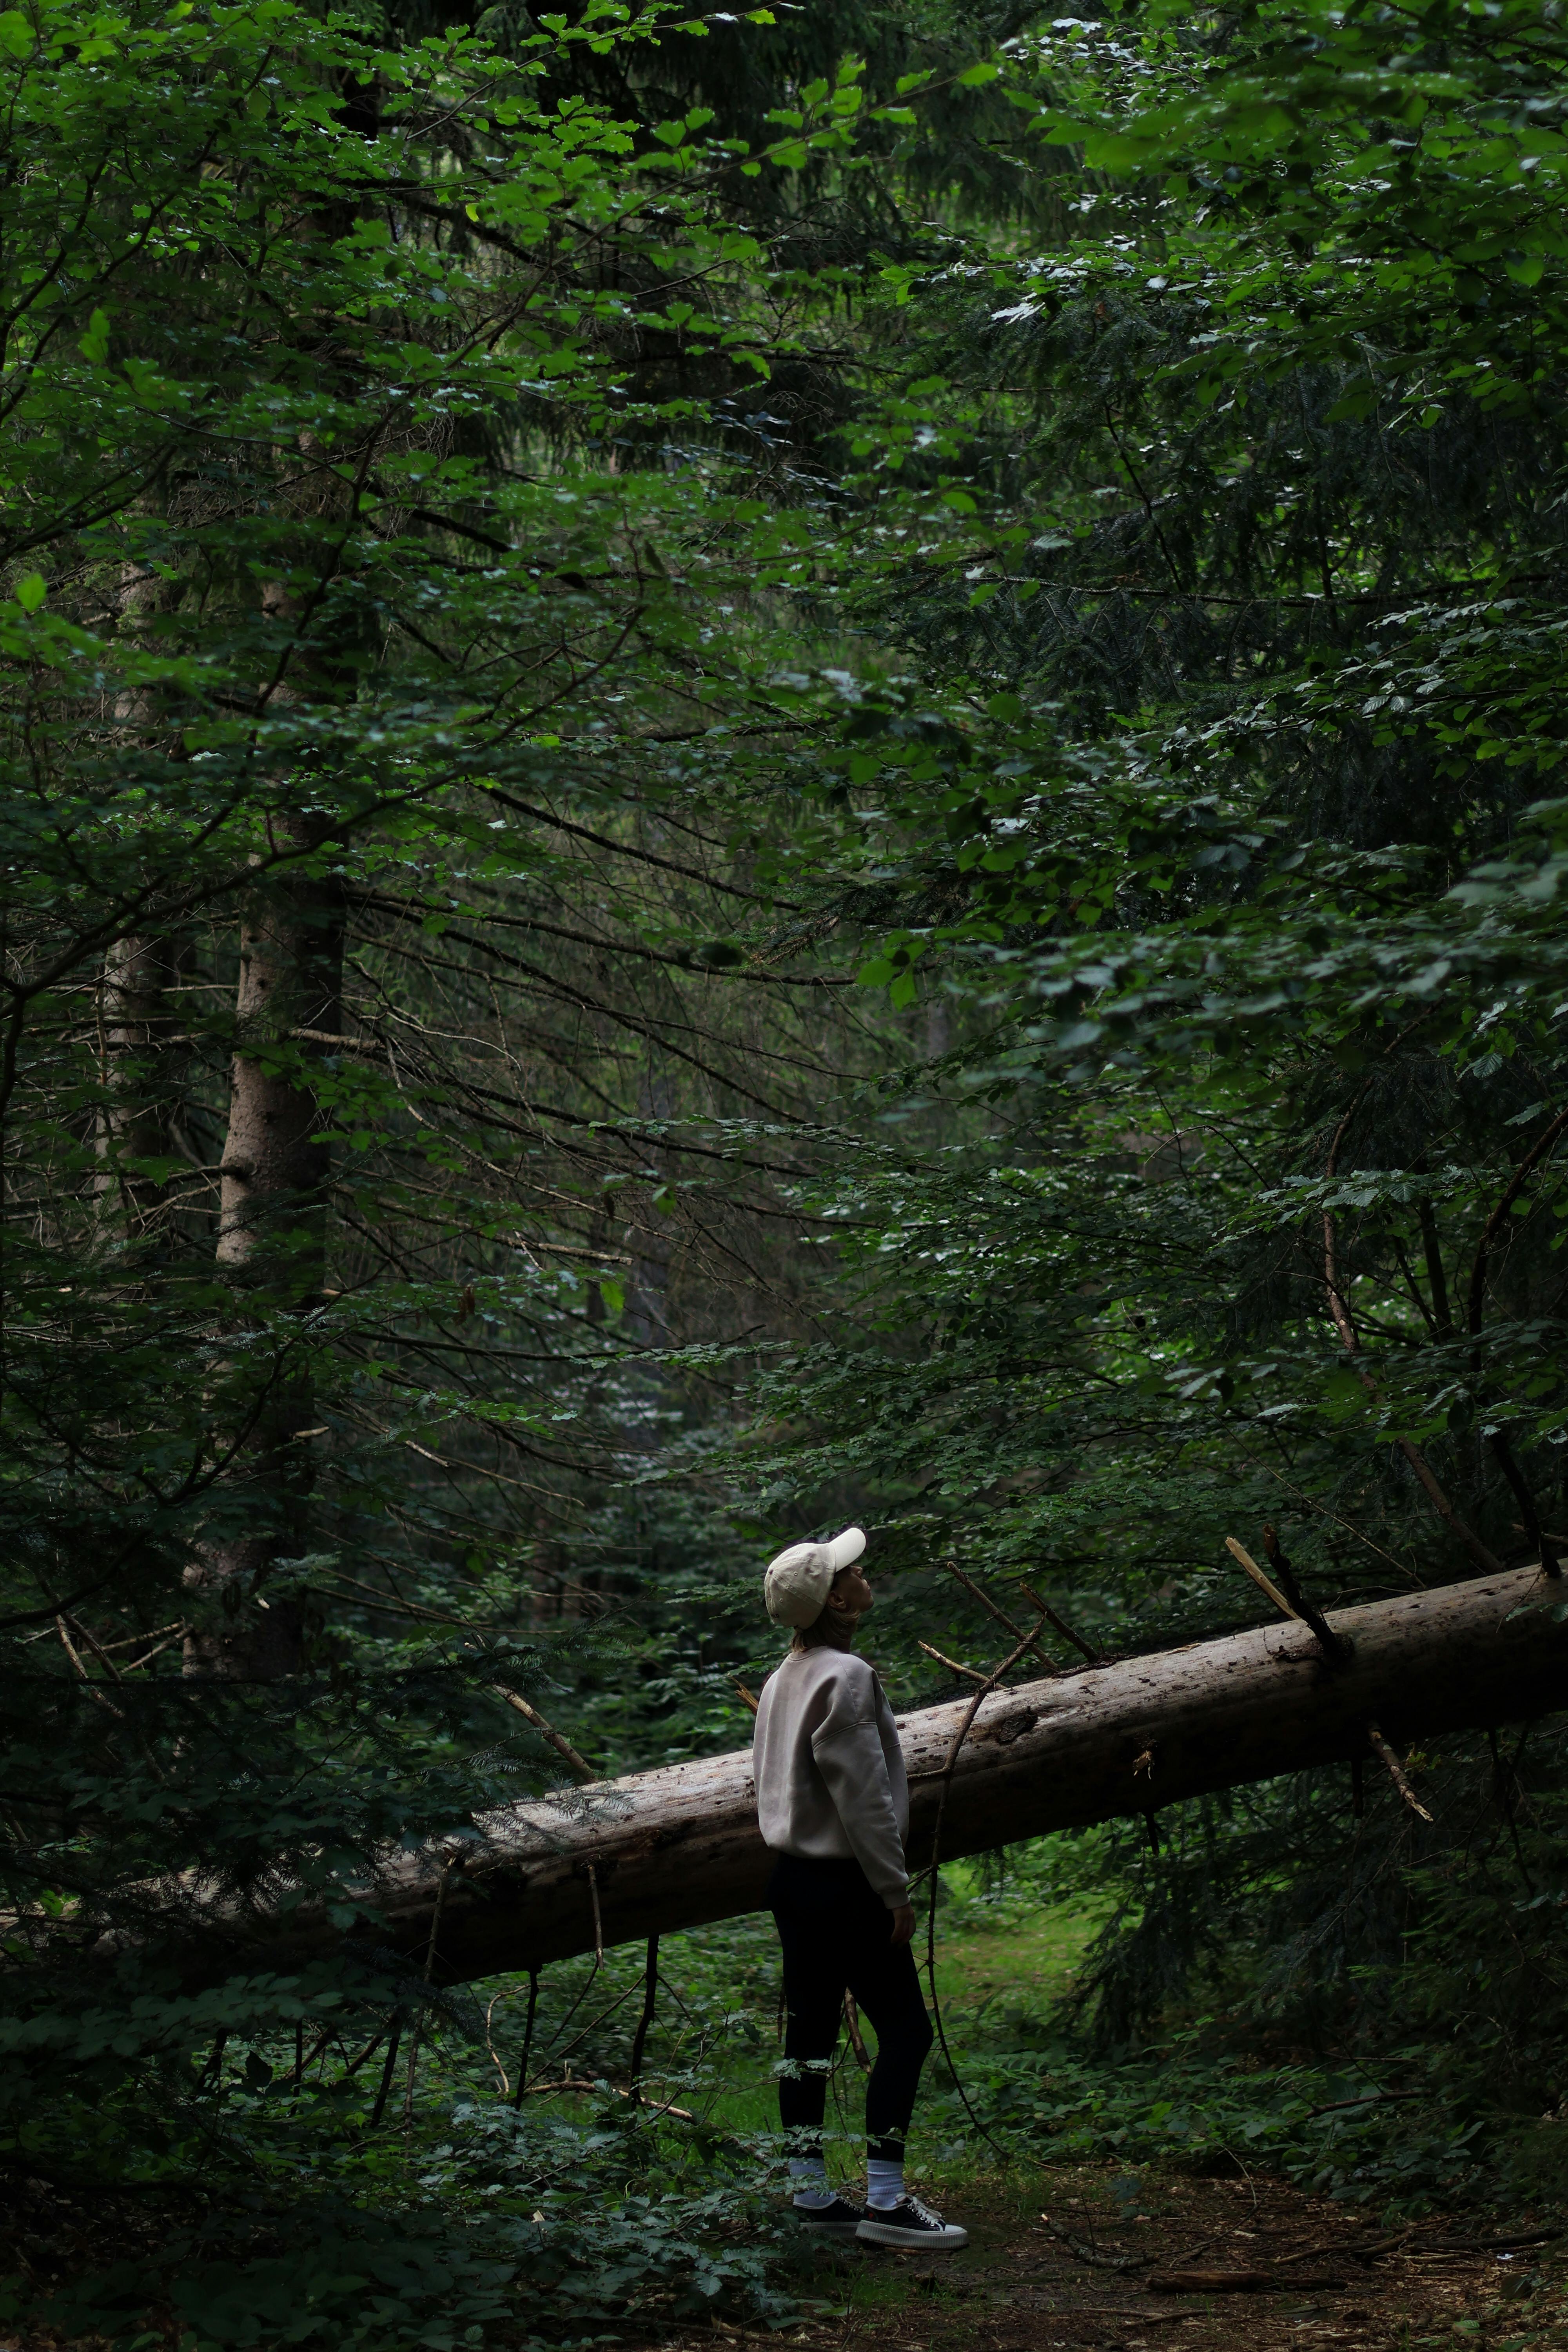 Forest Therapy: The Mindfulness of Forest Bathing